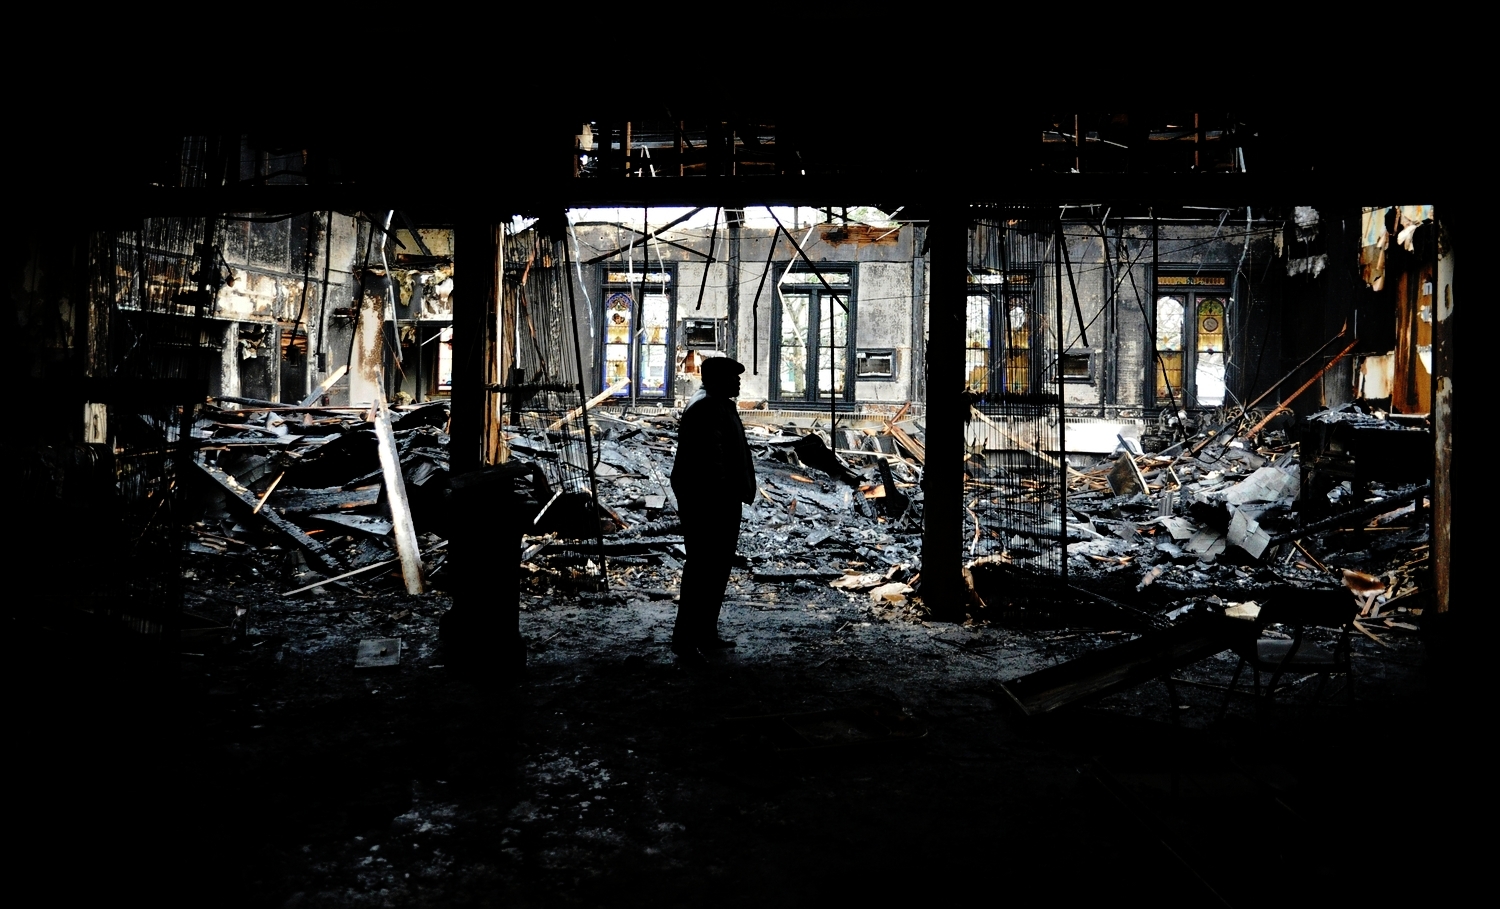  Church Fire Aftermath /&nbsp; The Daily Journal  